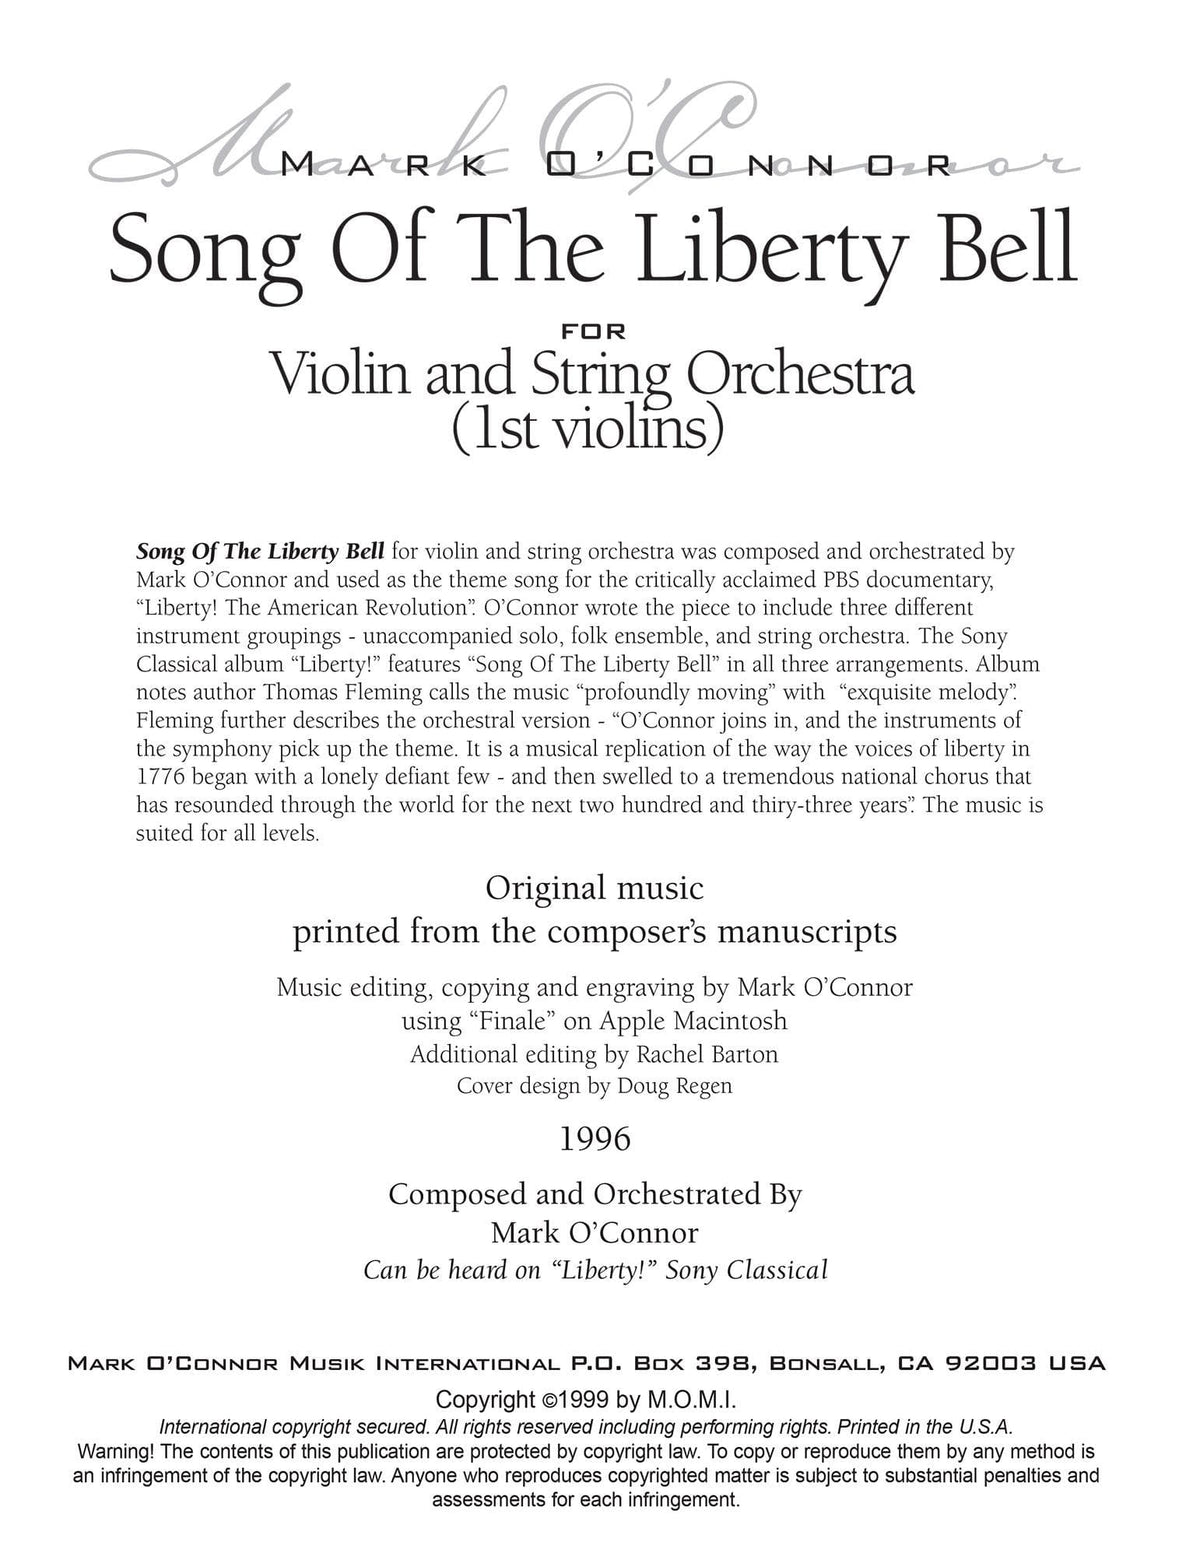 O'Connor, Mark - Song Of The Liberty Bell for Violin and String Orchestra - String Parts - Digital Download